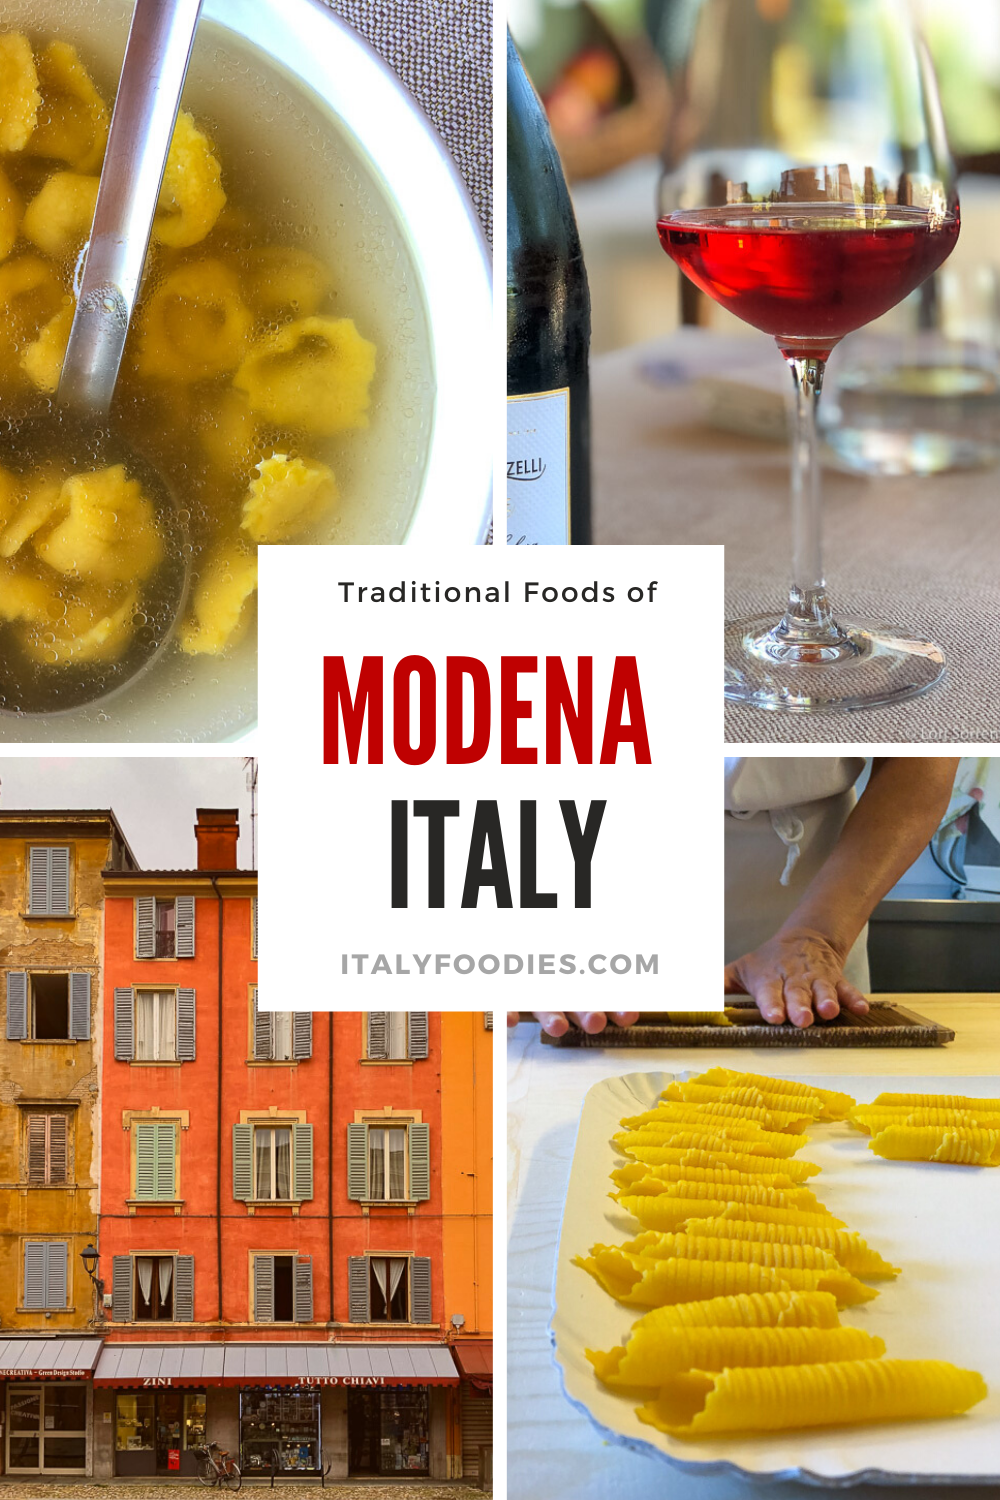 This Modena food guide shows what foods to eat in Modena, the best street food Modena has, and why the food in Modena is some of the best in Italy.